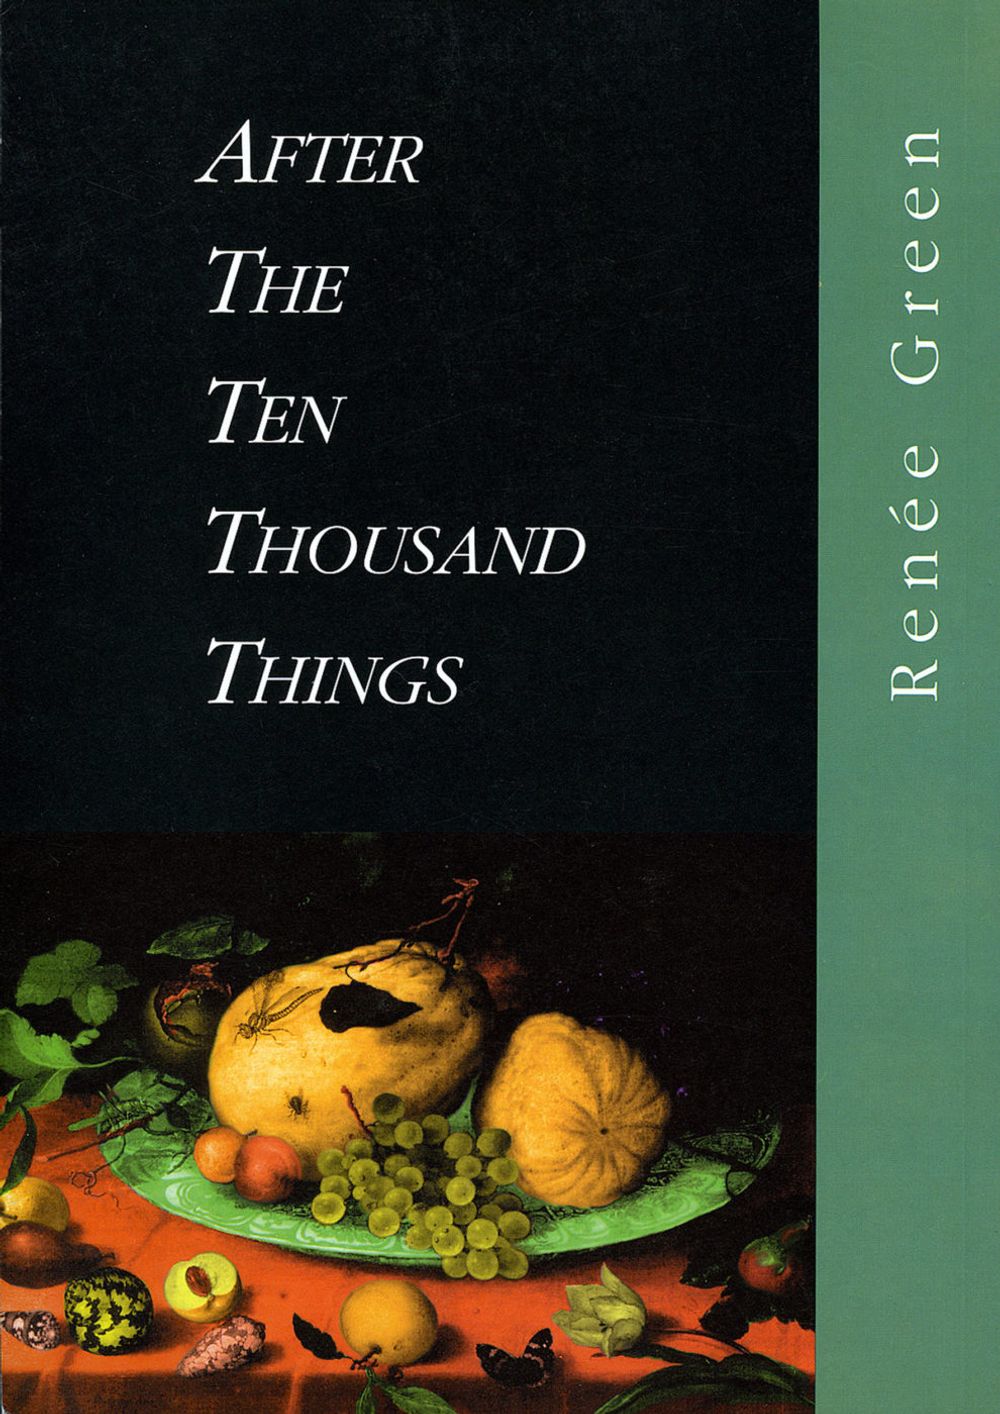 Book cover on plain gray background with title of After the Ten Thousand Things